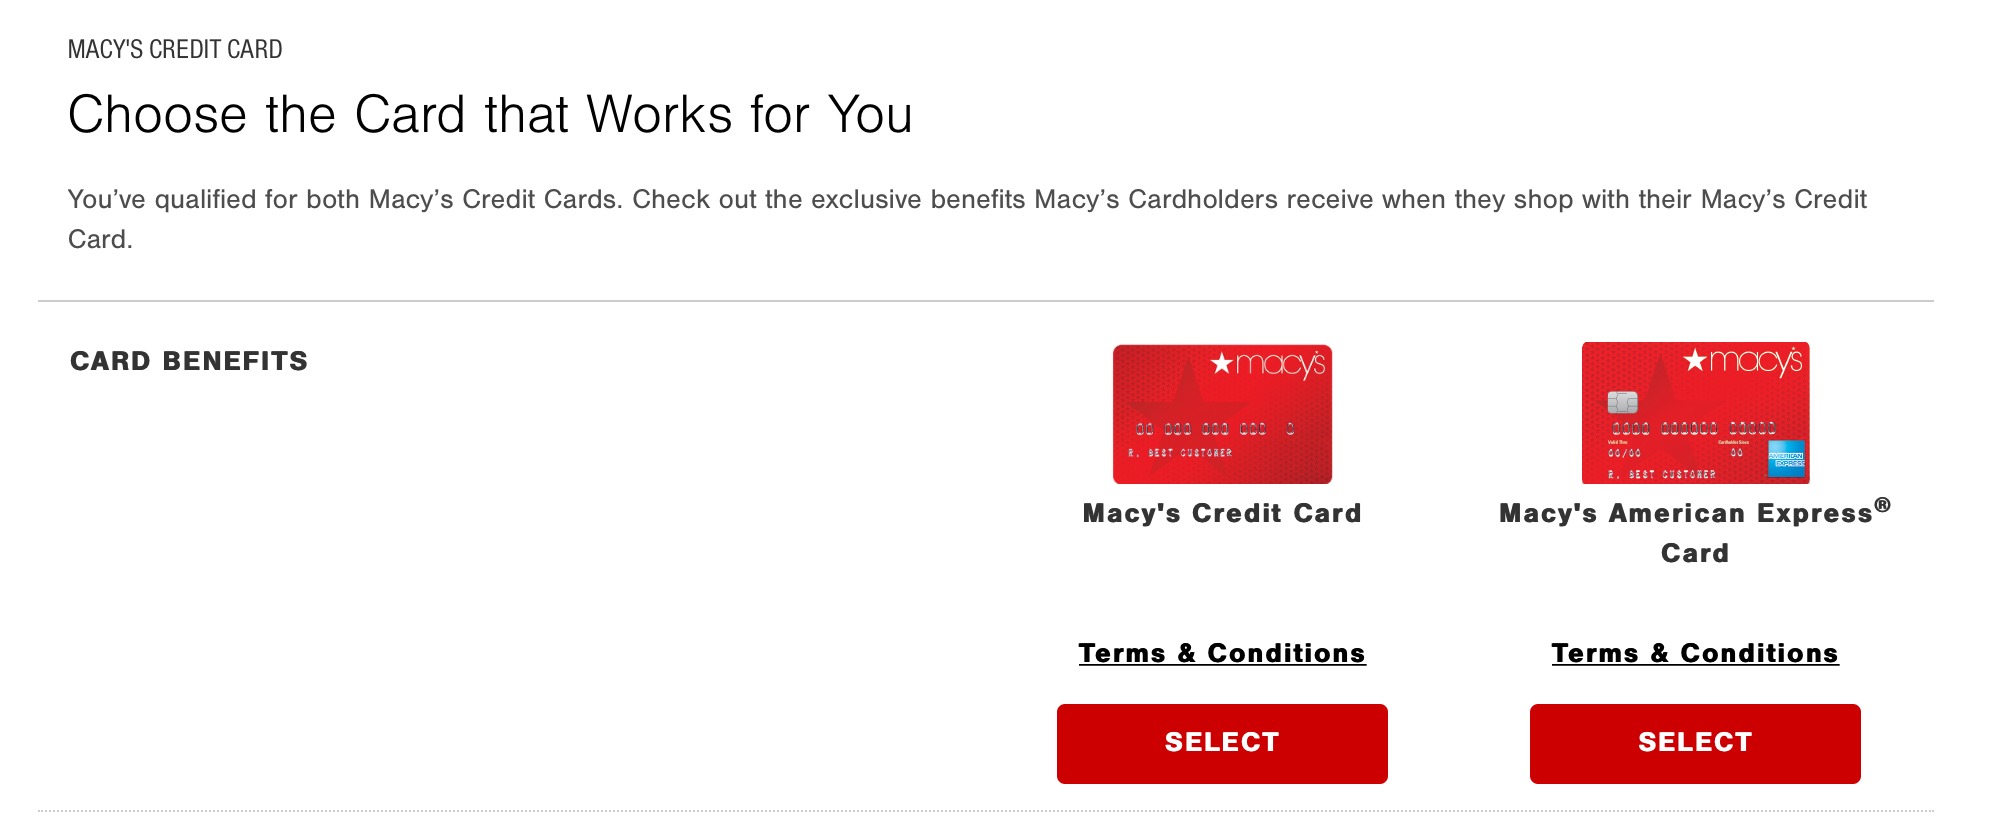 When Does The Macy’s Billing Cycle End?